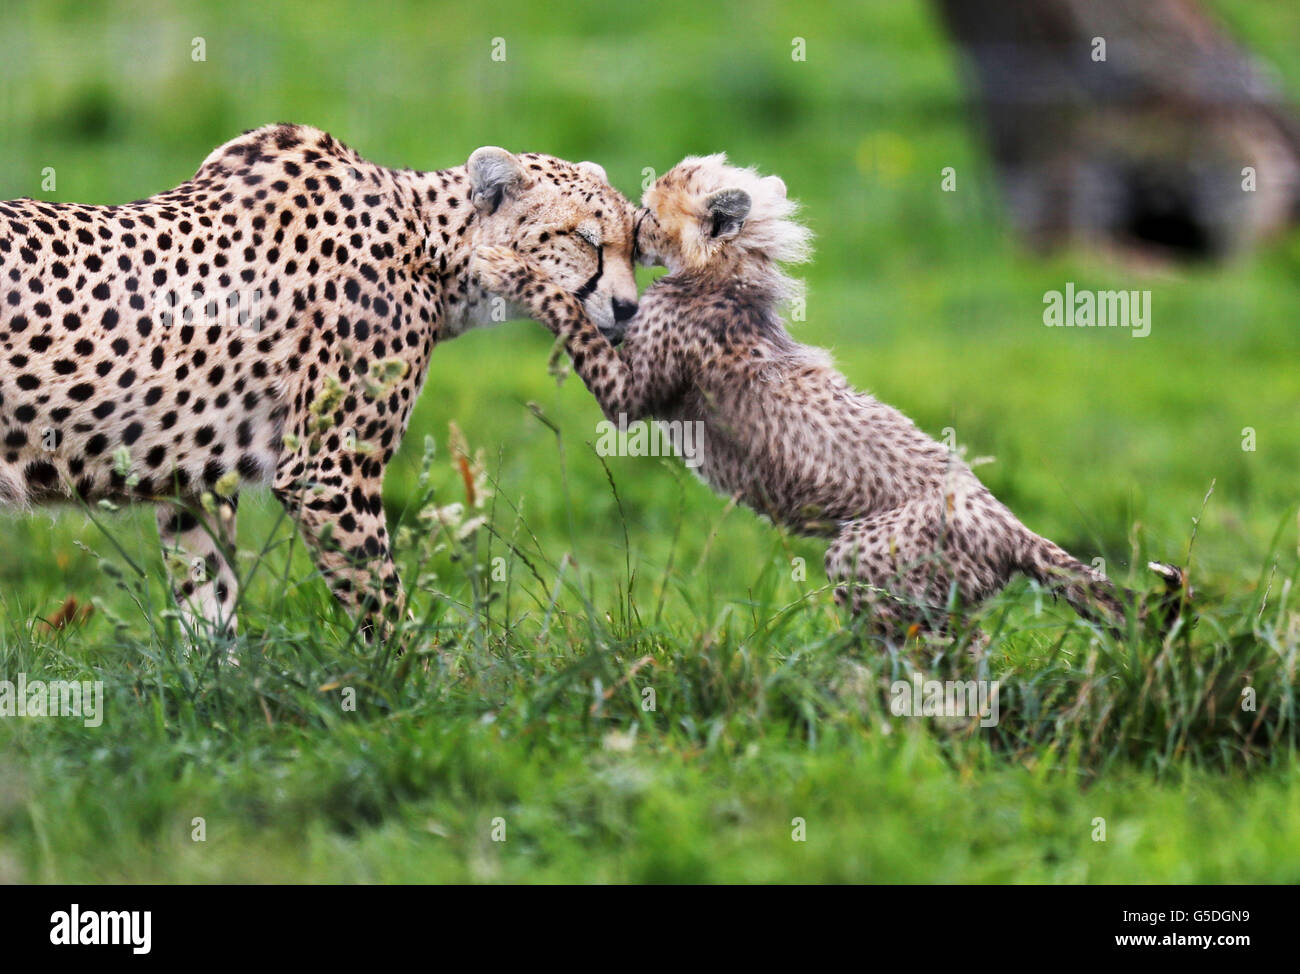 One of seven cheetah cubs born in March 2012 at Whipsnade Zoo, Dunstable, Bedfordshire, plays with its mother Dubai, the cubs, were the first litter of Northern cheetah cubs born in the UK. Stock Photo